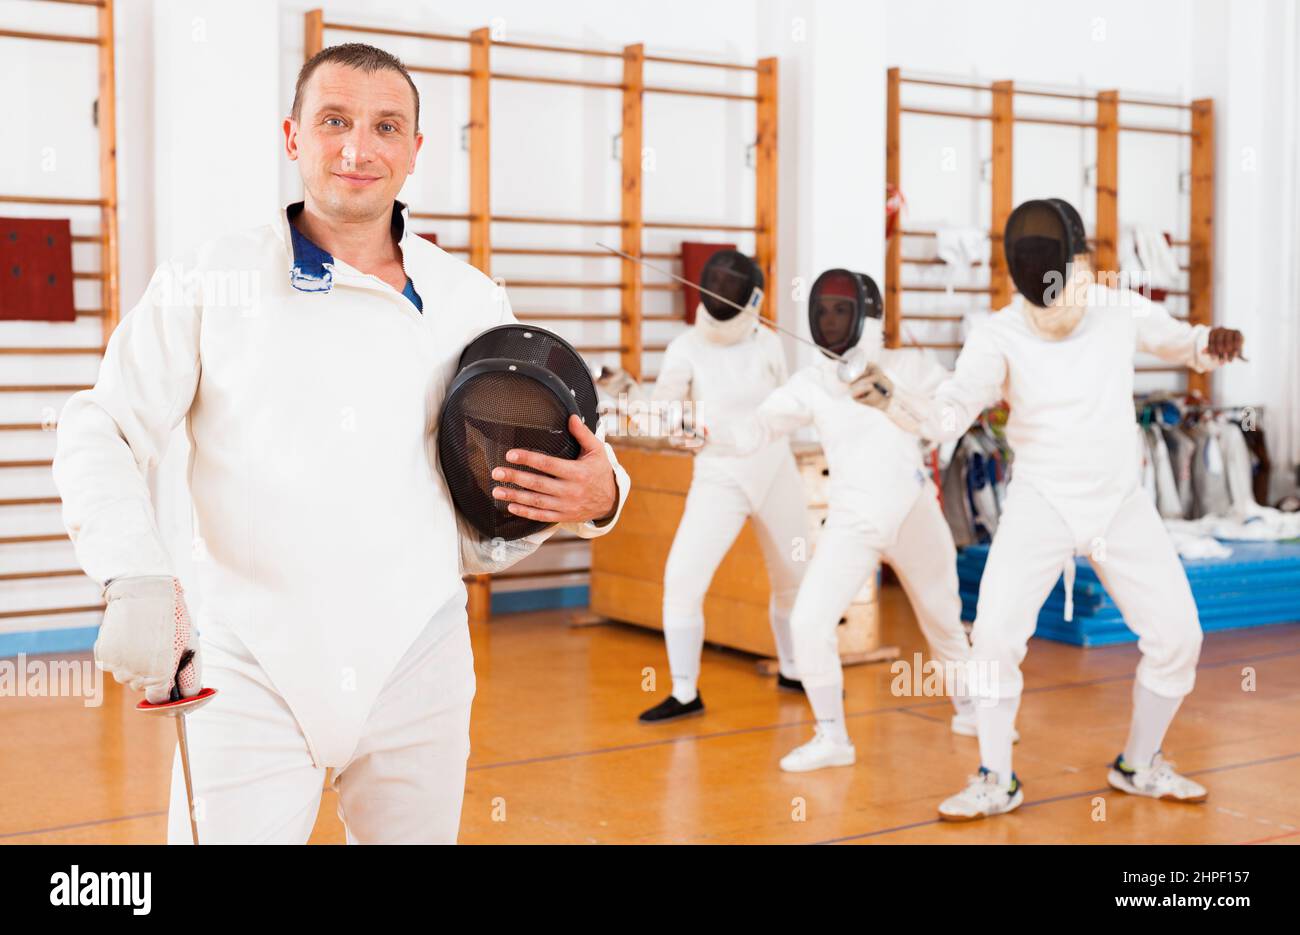 Active young male fencer in uniform standing with mask and foil at fencing room Stock Photo